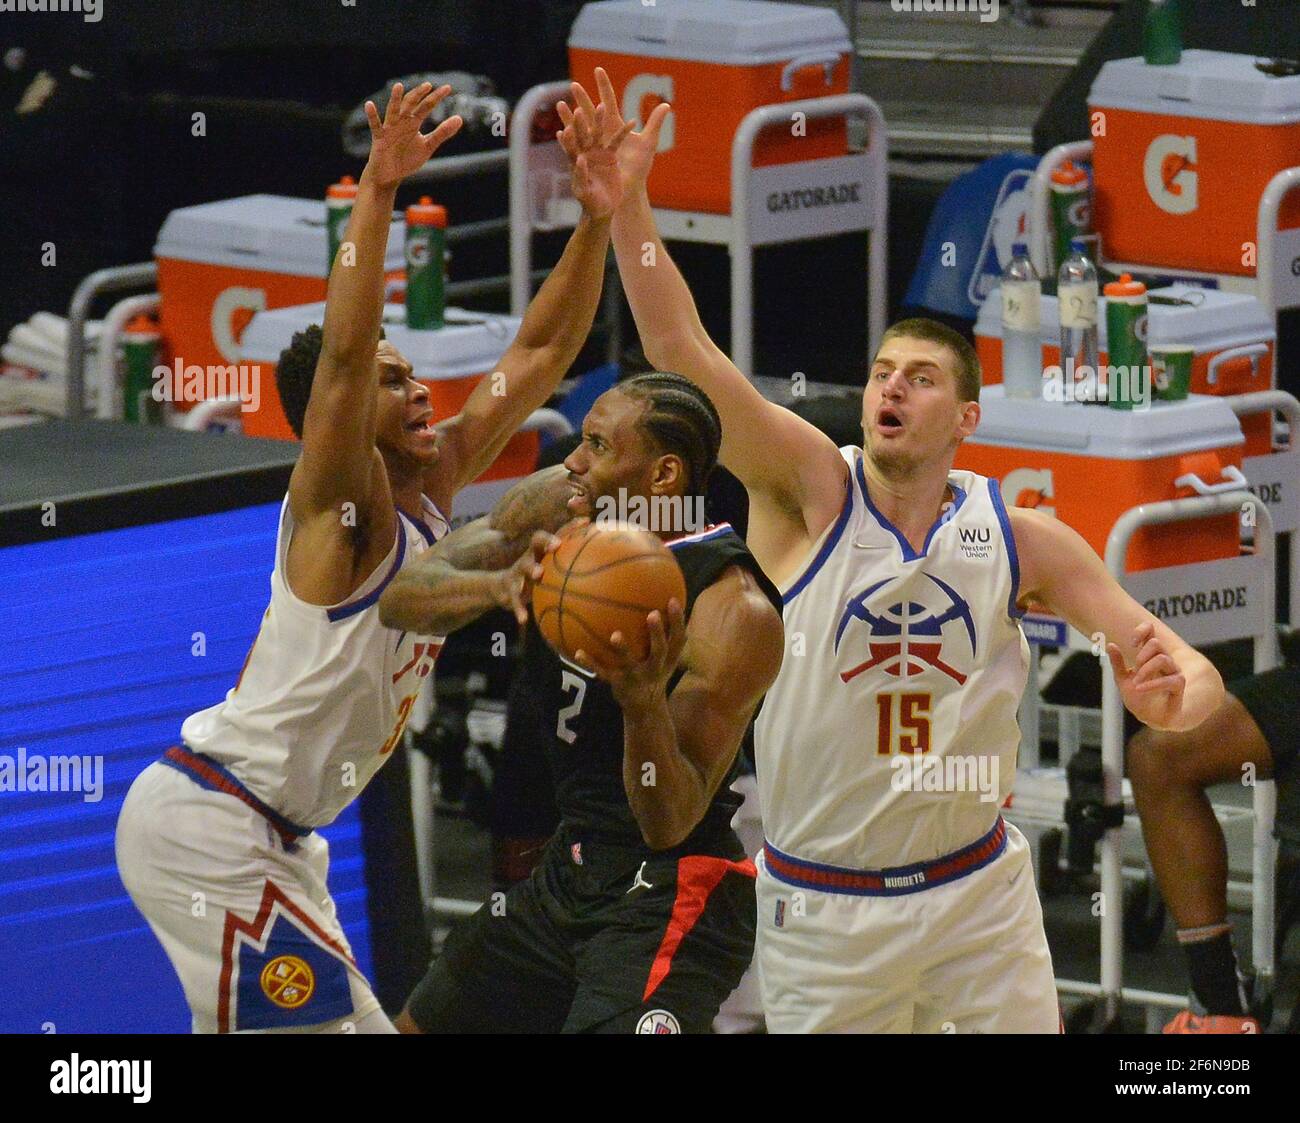 Los Angeles, United States. 18th Jan, 2021. Los Angeles Clippers' forward Terrance  Mann is double teamed by Indiana Pacers' center Goga Bitadzen and guard  Cassius Stanley in the paint during the fourth